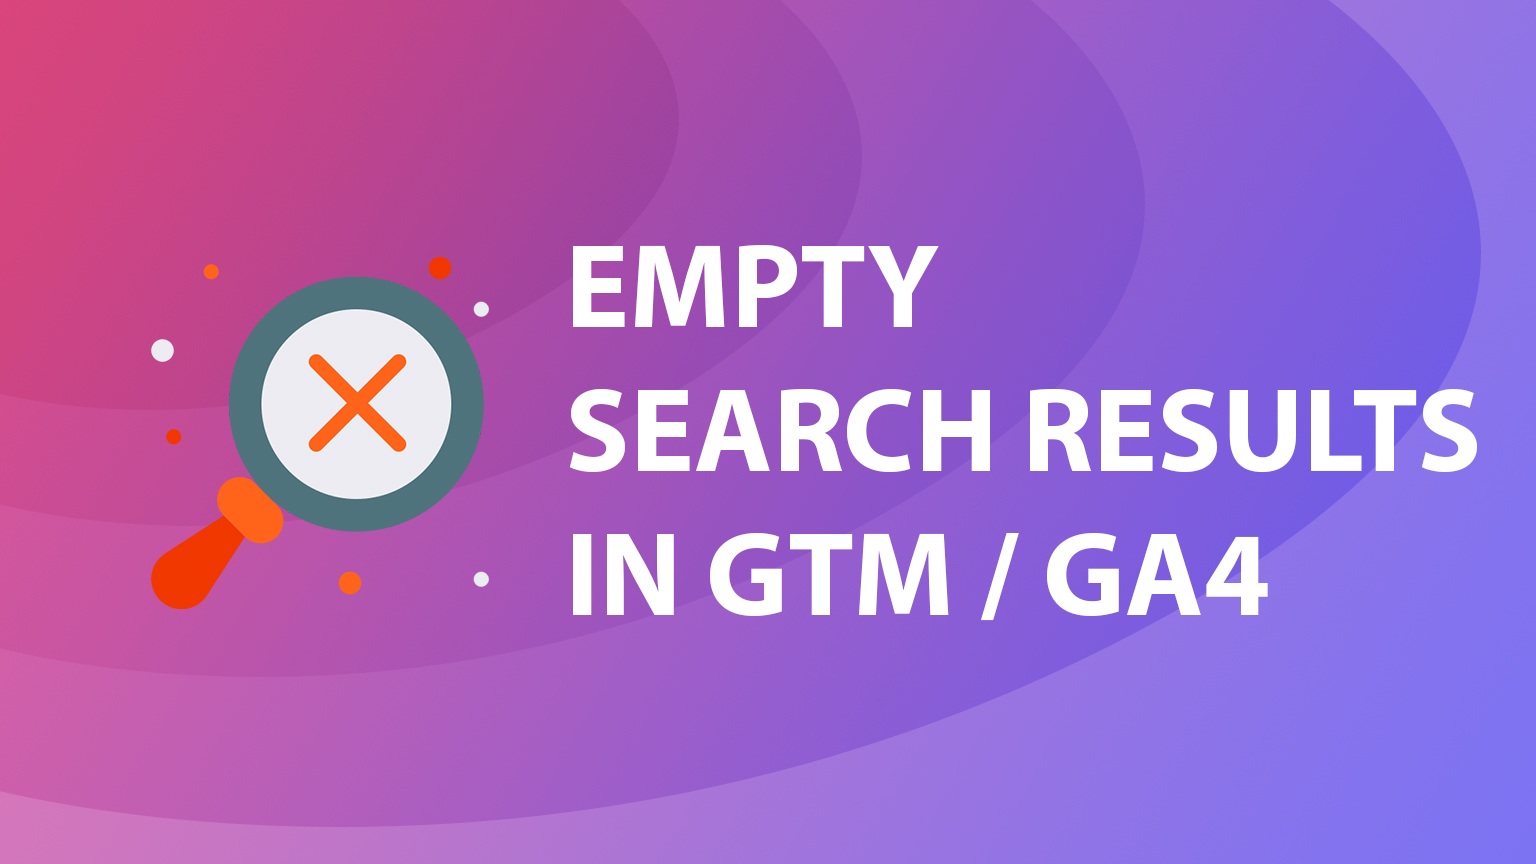 Tracking empty search results in GTM/GA4